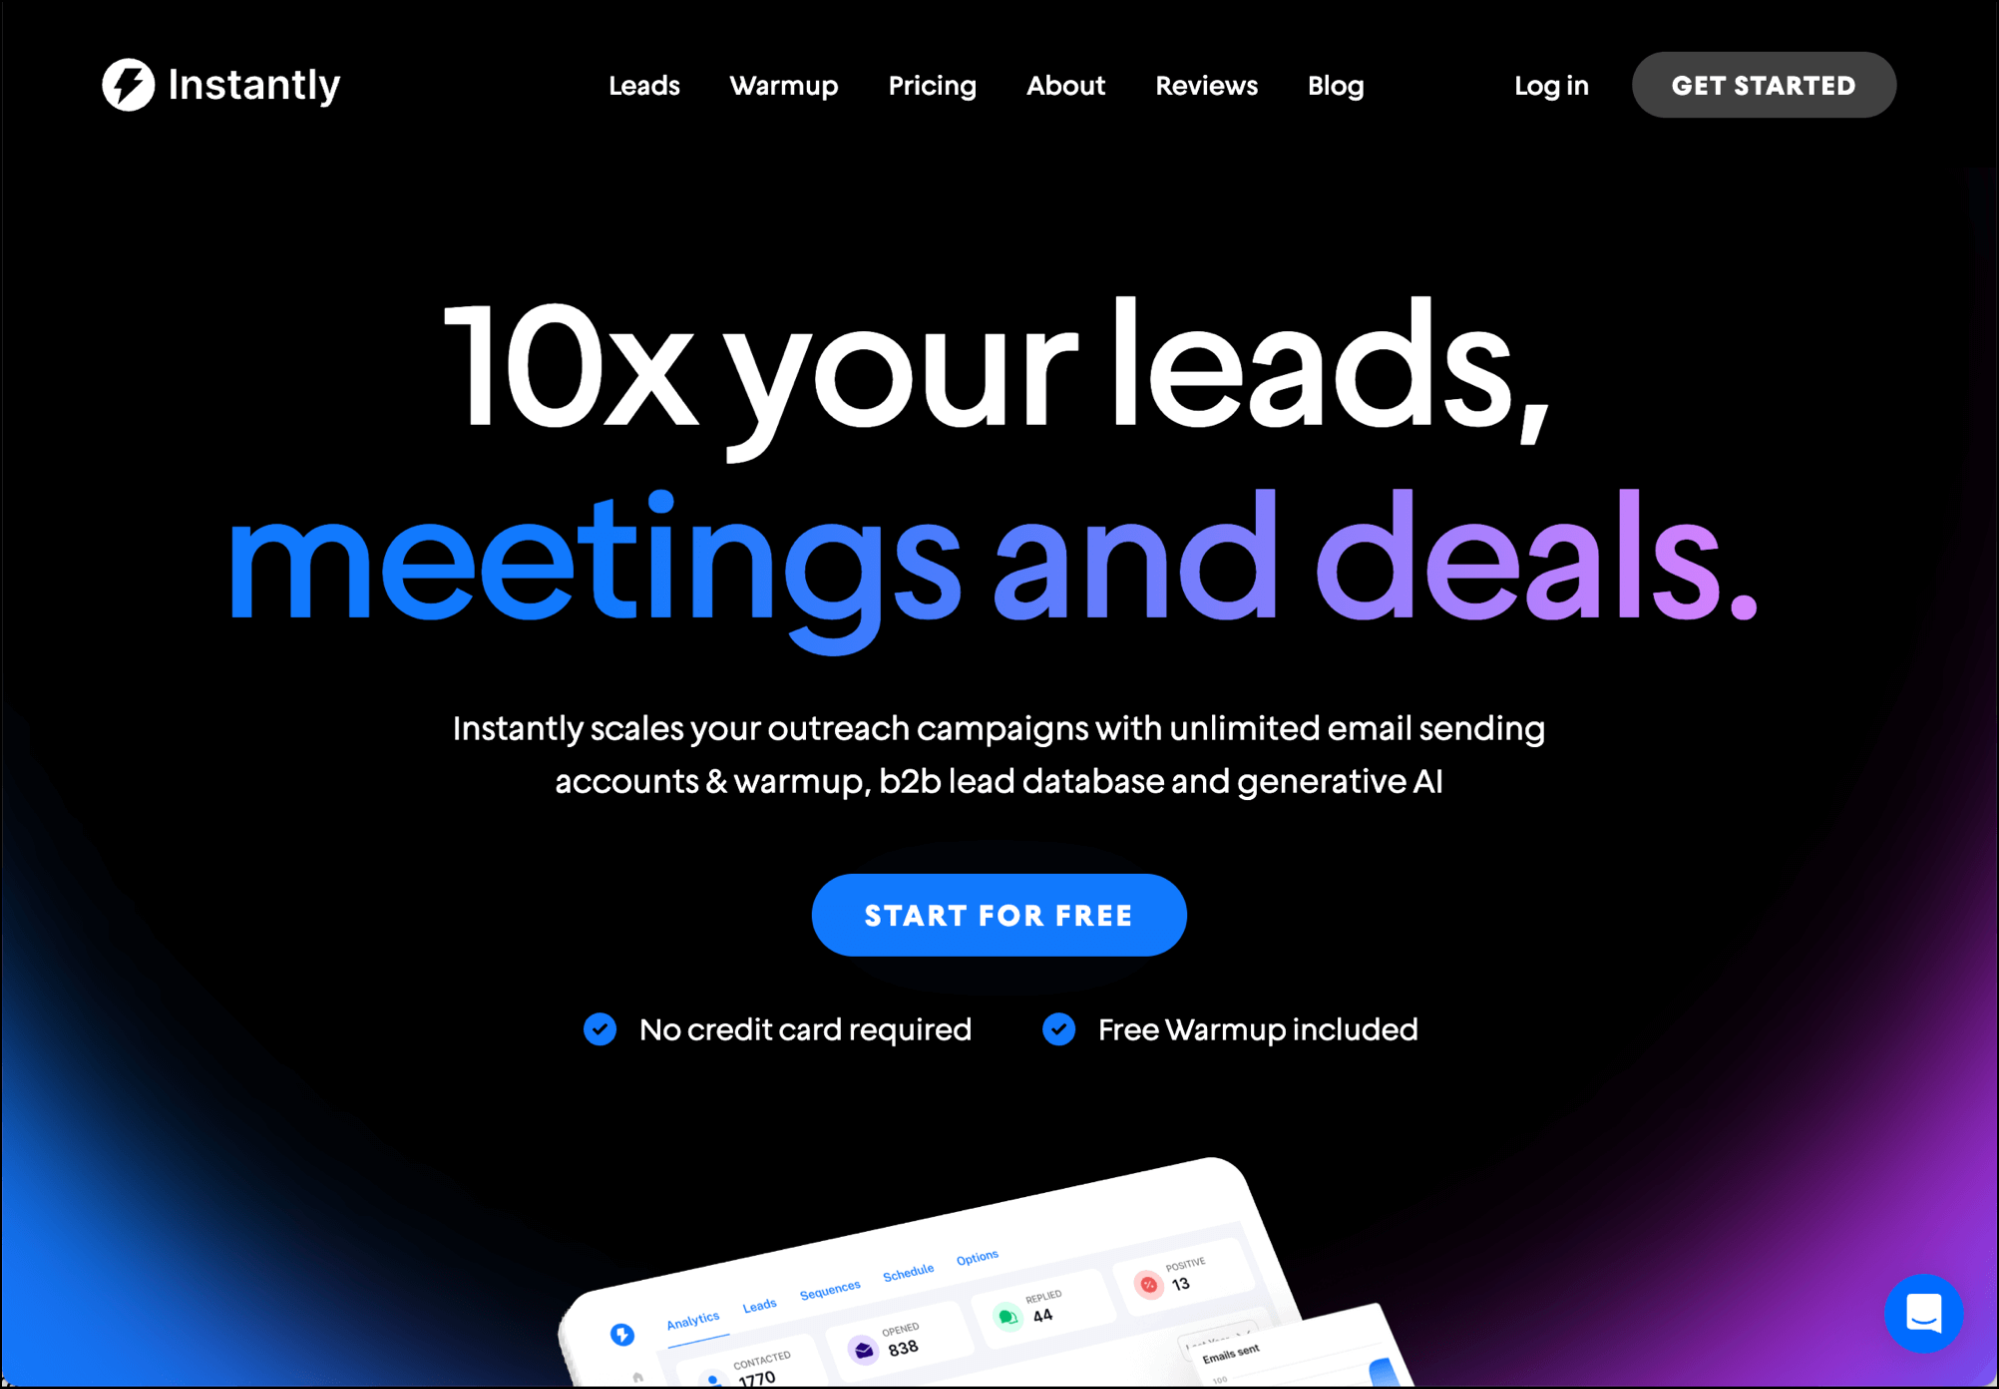 Instantly's homepage